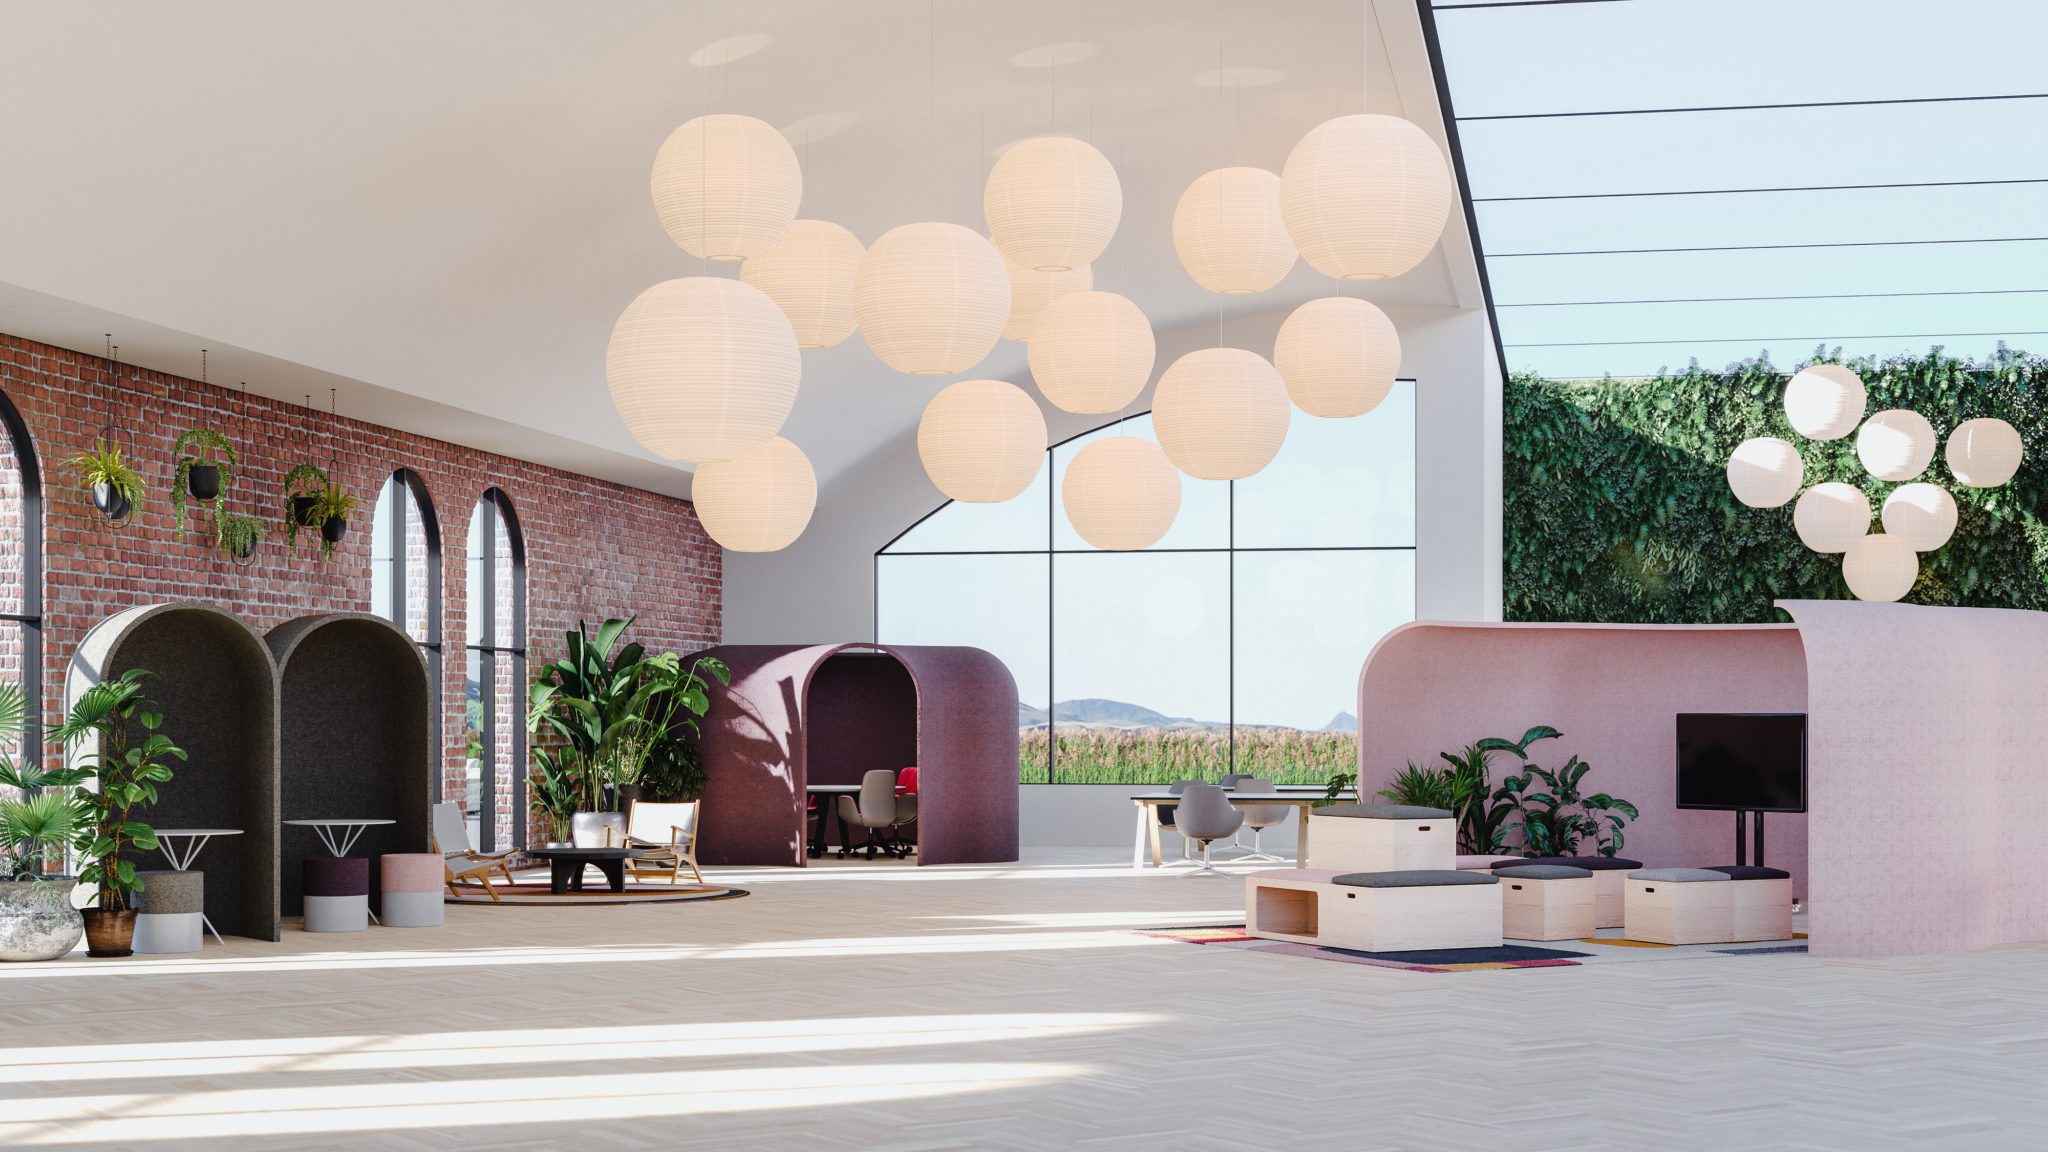 round light fixtures and pink furniture